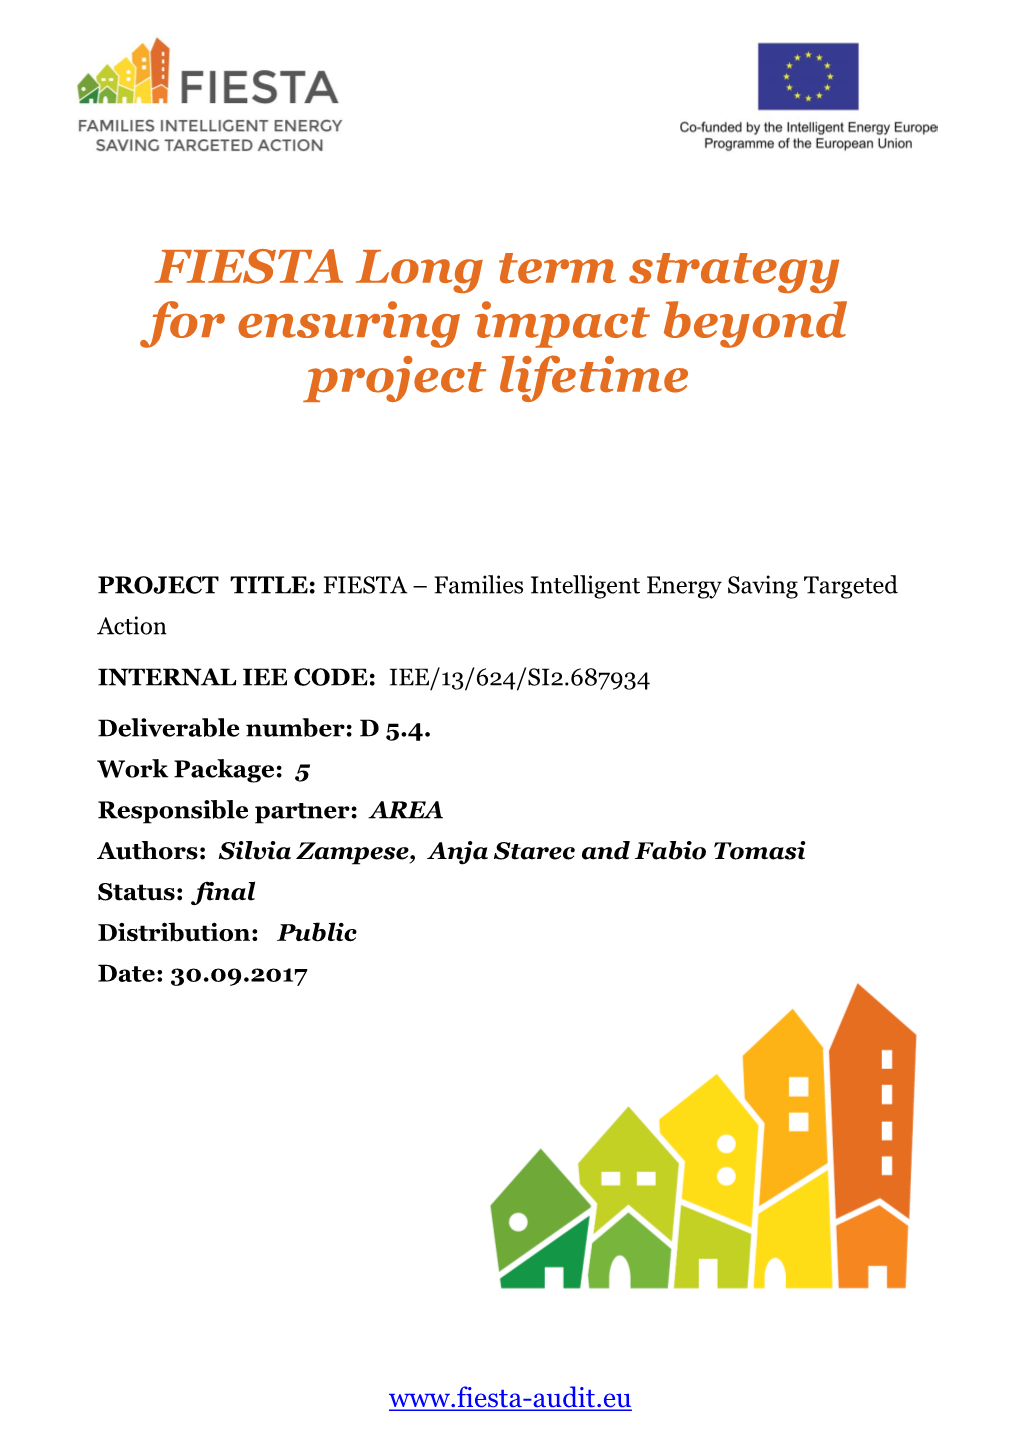 FIESTA Long Term Strategy for Ensuring Impact Beyond Project Lifetime